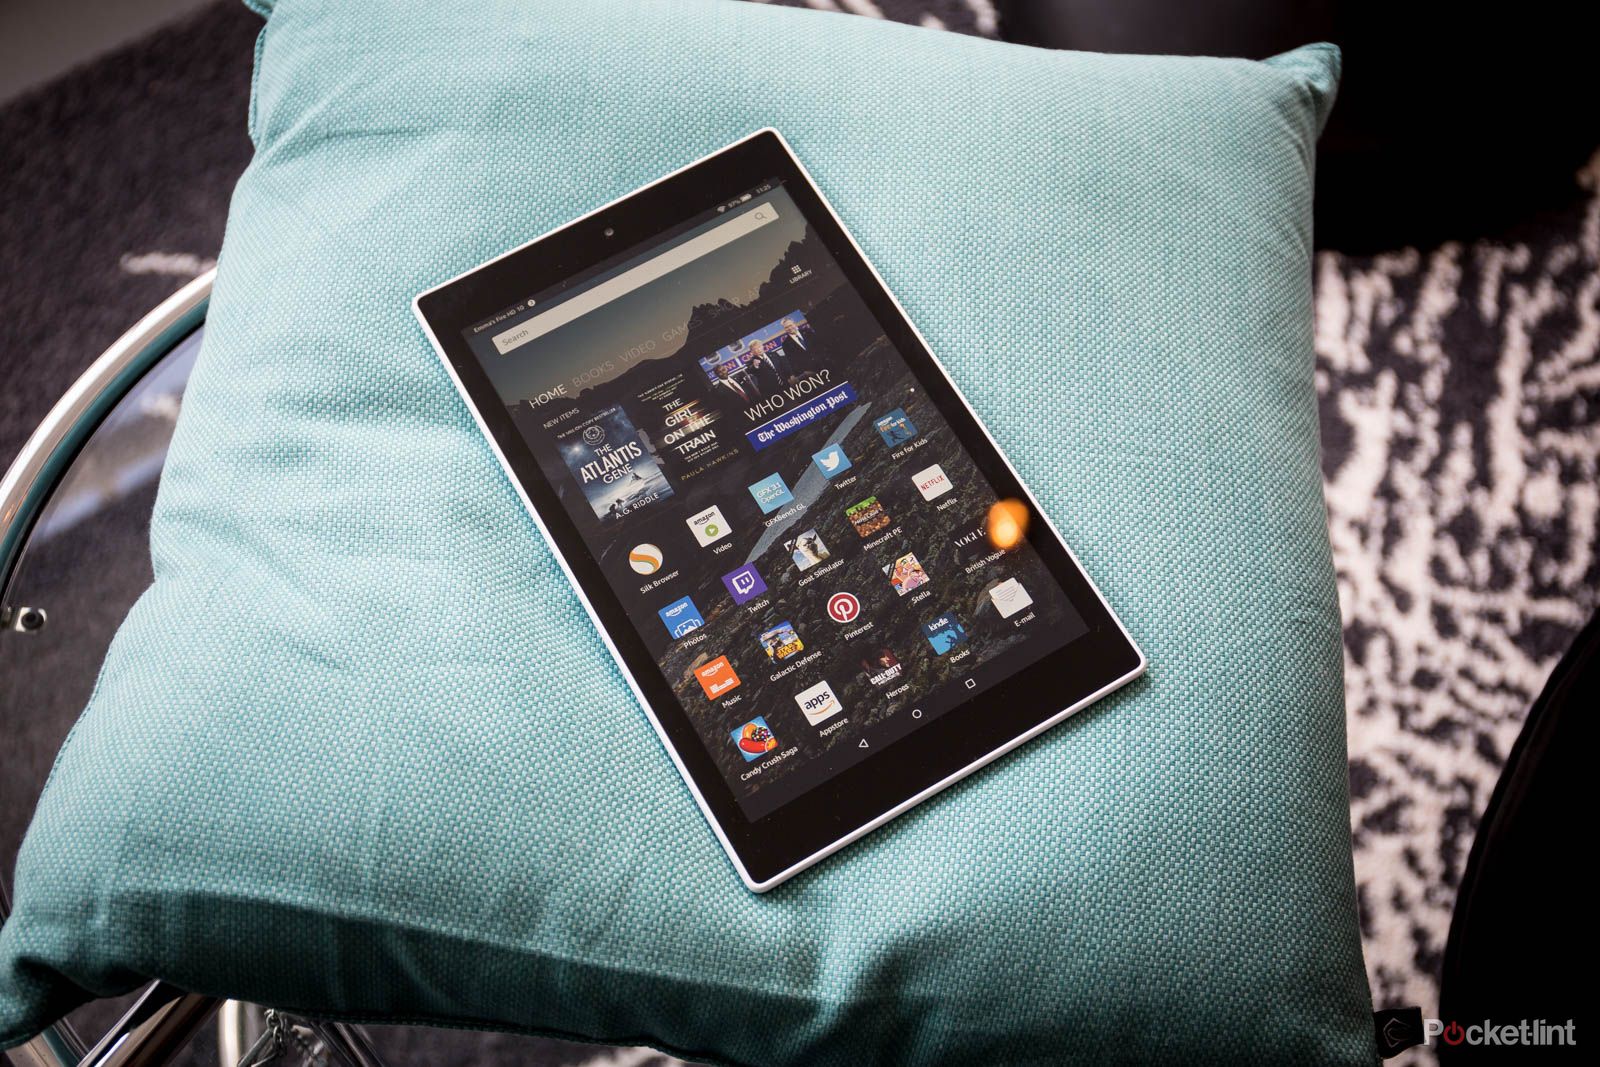 Amazon Fire HD 8 display against a pillow. 